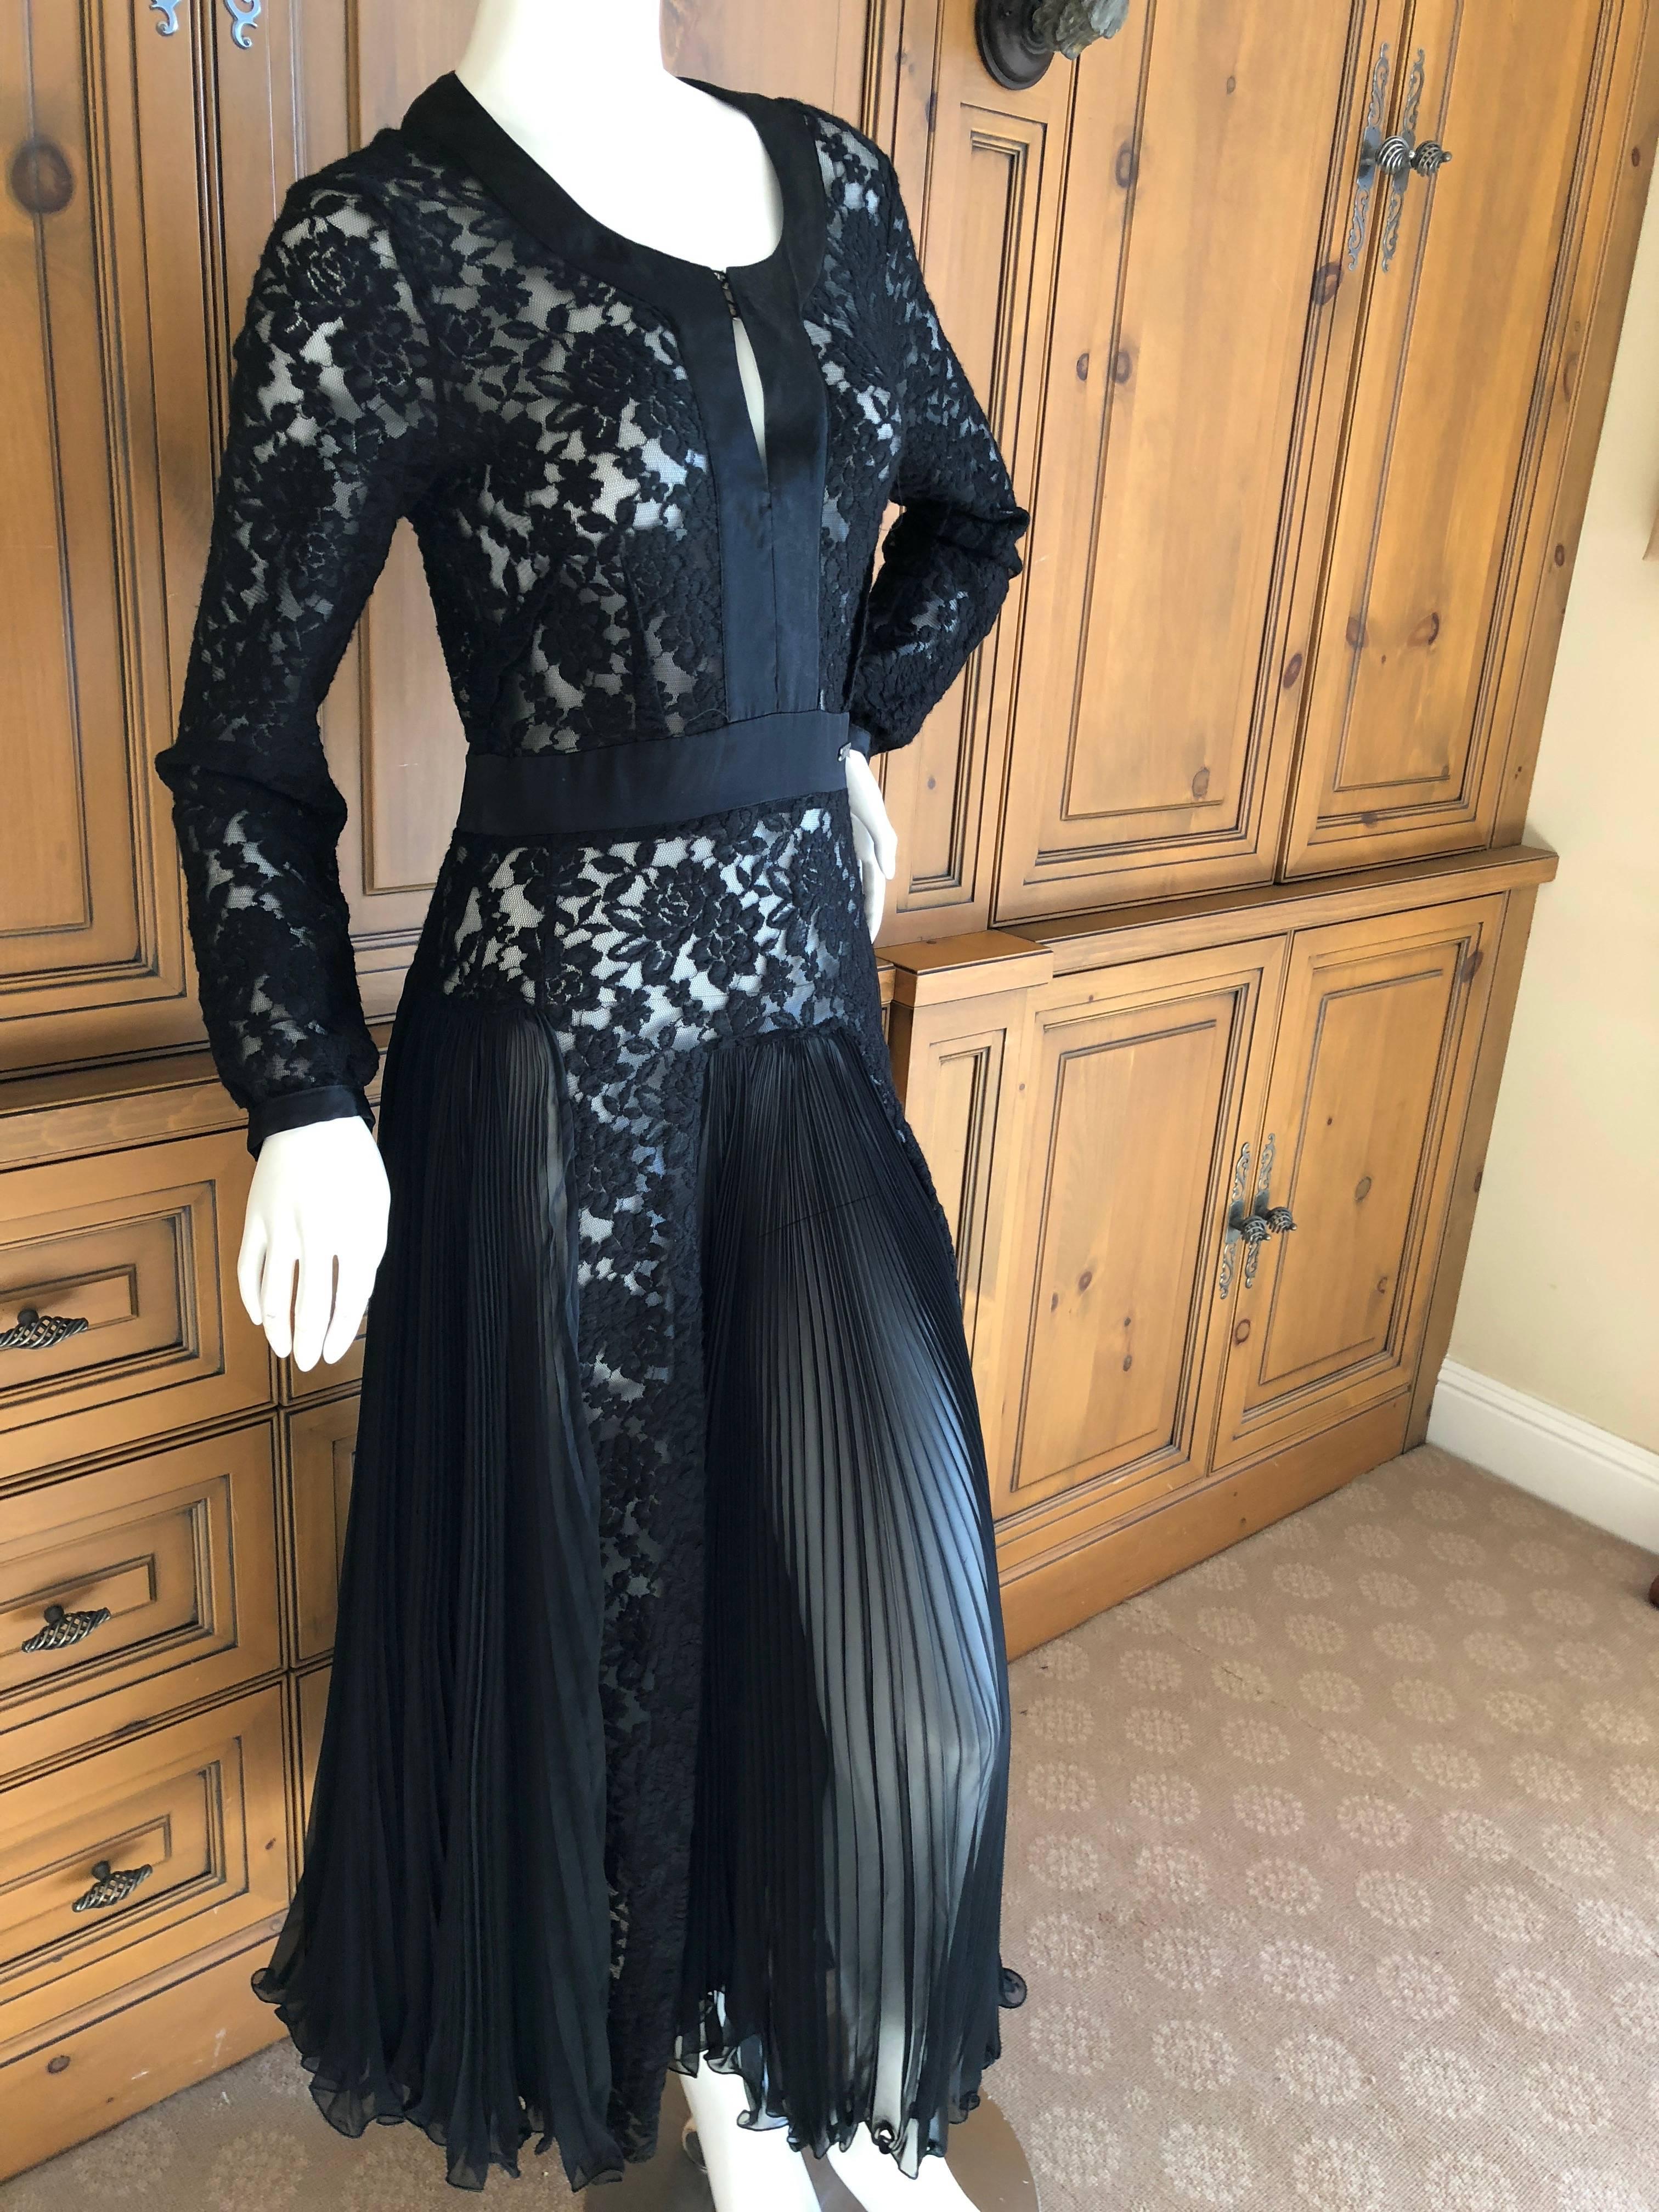 Wonderful sheer lace dress from John Galliano. 
Featuring wide accordion pleated skirt and a beautiful separate slip that can be worn as a dress. I show the dress with and without the slip.
Tea length.
Size 40
Bust 38"
Waist 25"
Hips